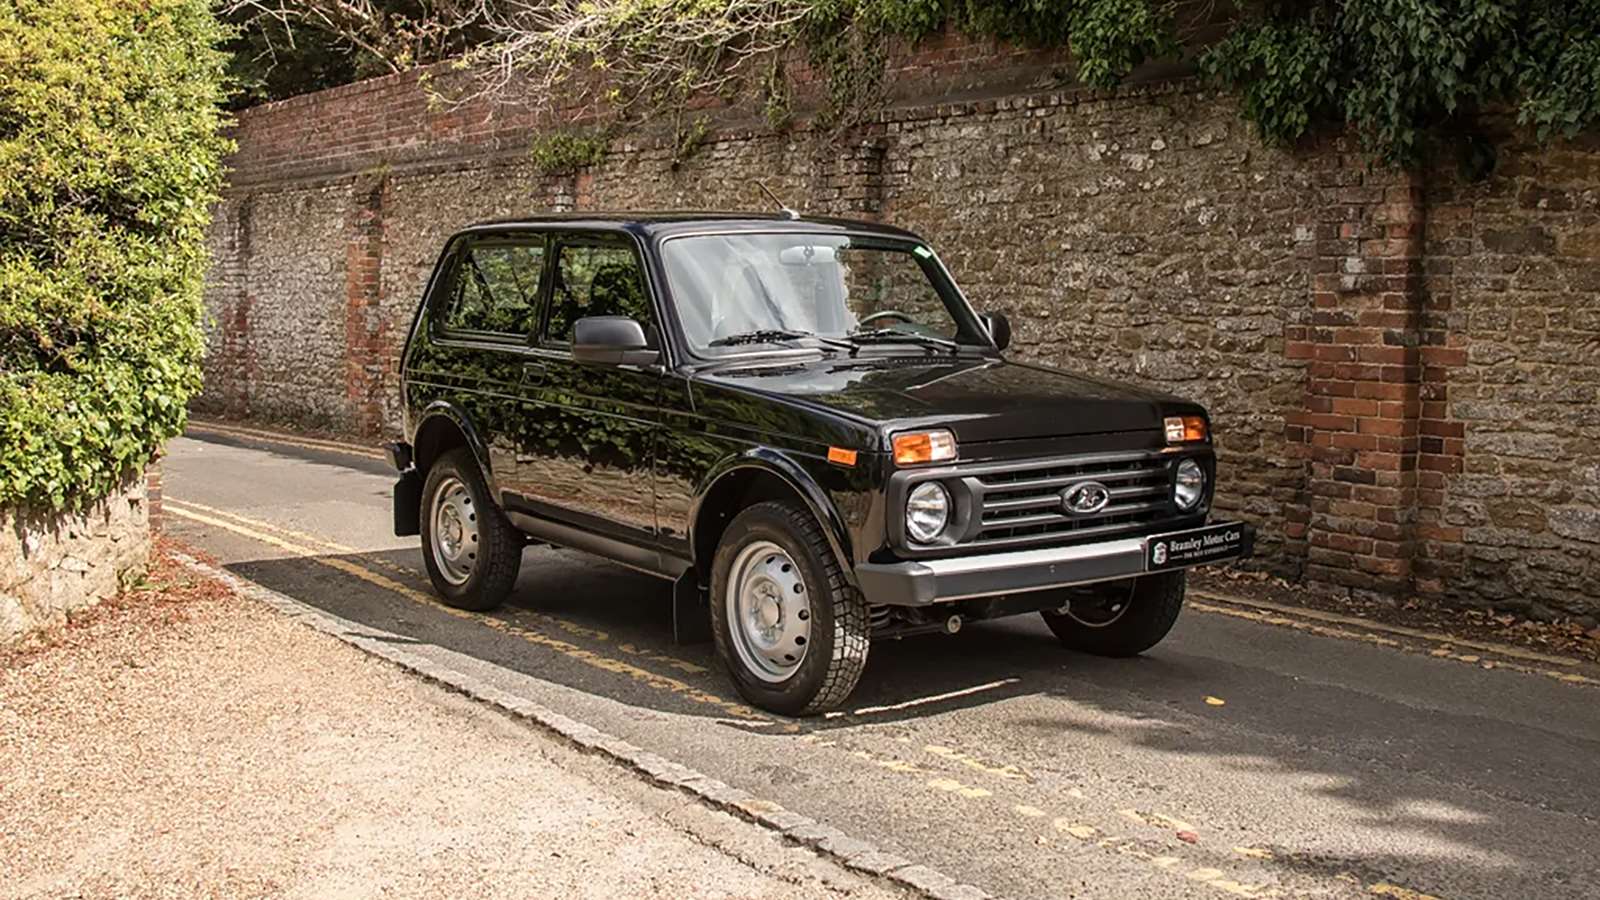 This brand-new Lada Niva is up for sale alongside Ferraris and